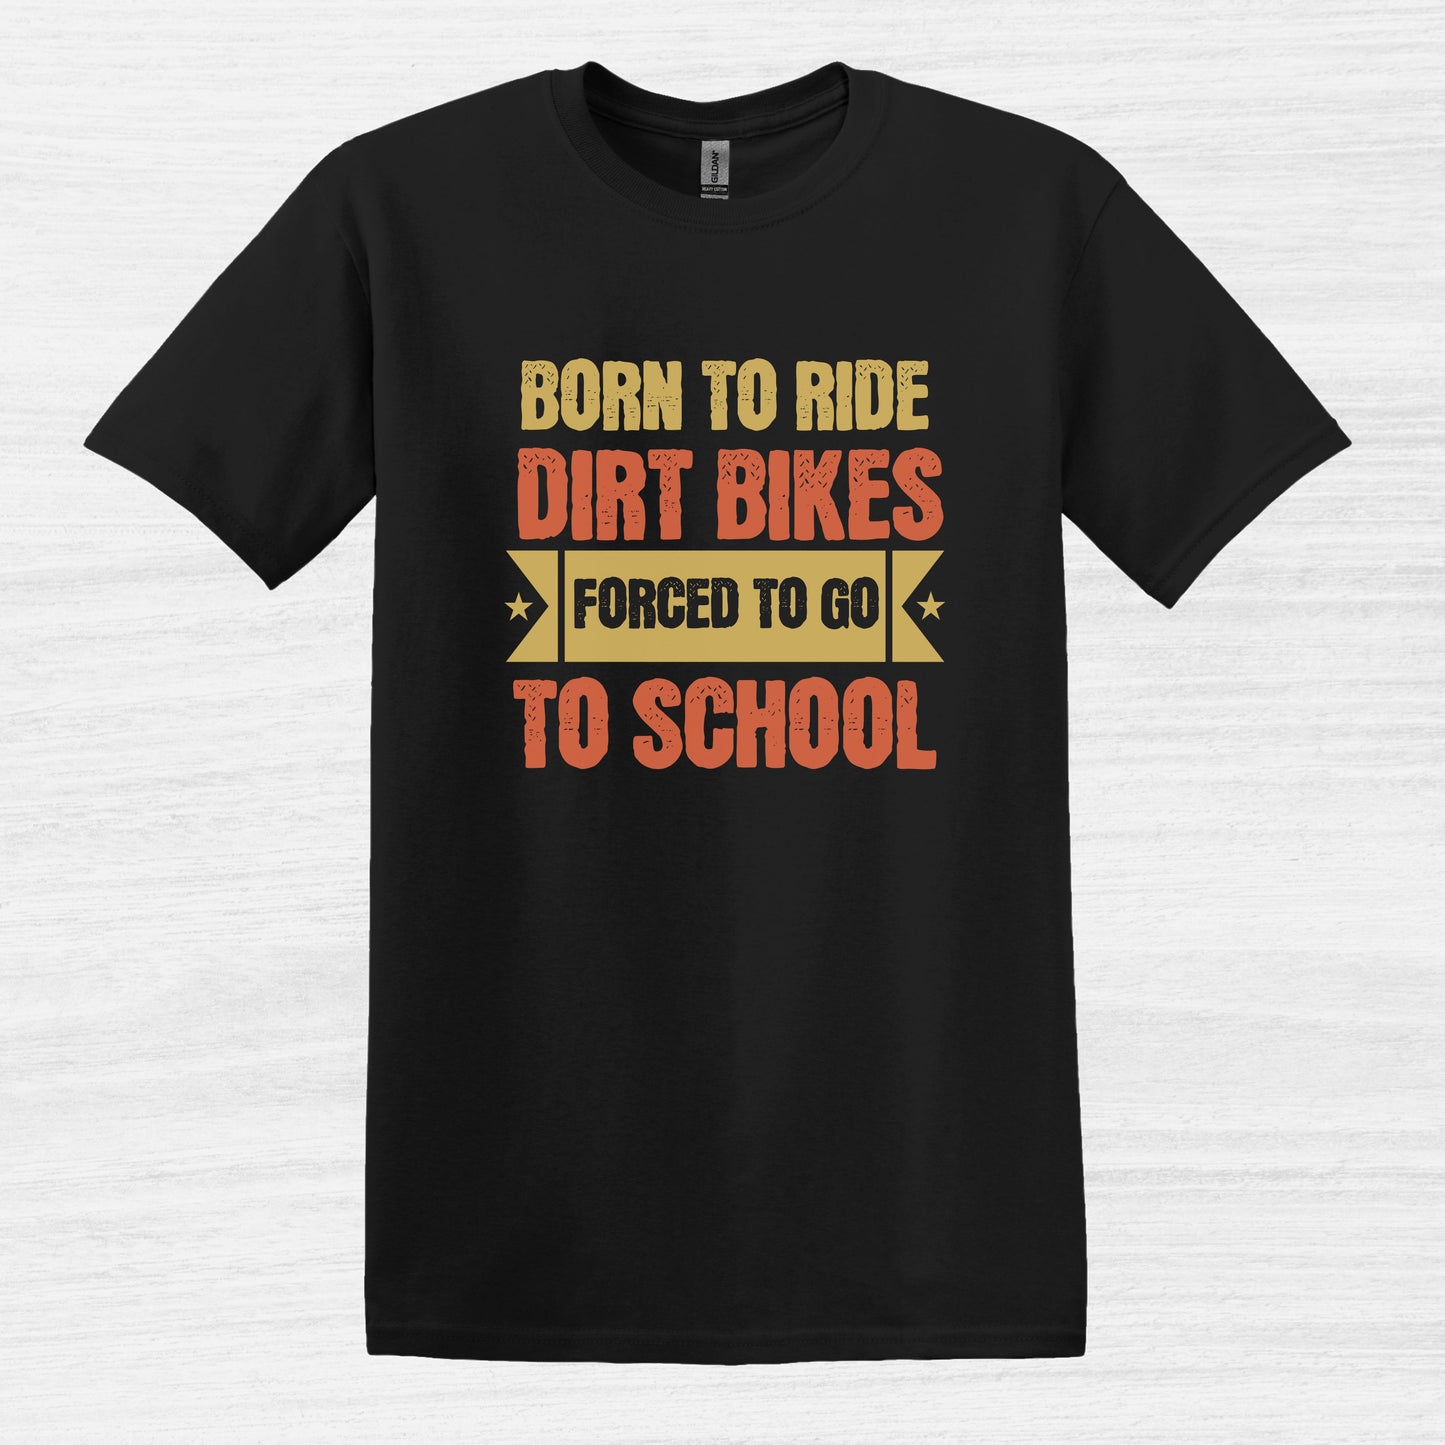 Bike Bliss Born to Ride Dirt Bikes Forced to go to School T-shirt for Men Black 2